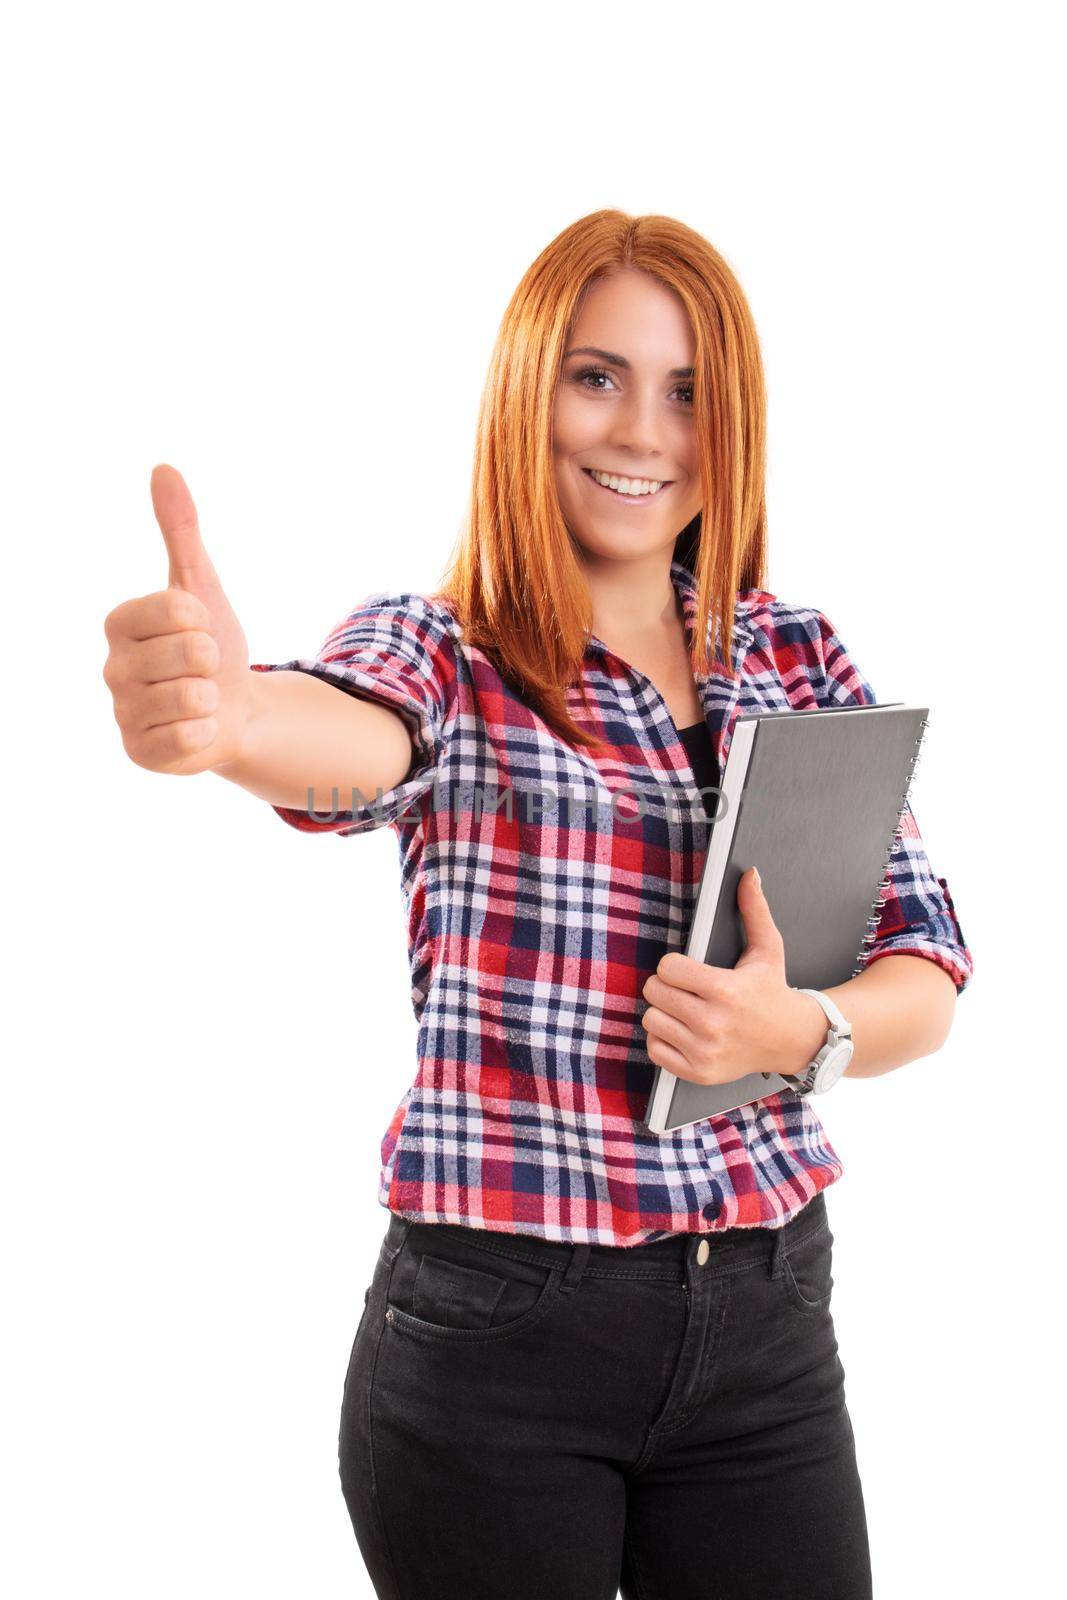 Beautiful smiling young woman holding a notebook and giving thumb up, isolated on white background. Successful student girl showing a positive gesture. Winner, approval, success concept.